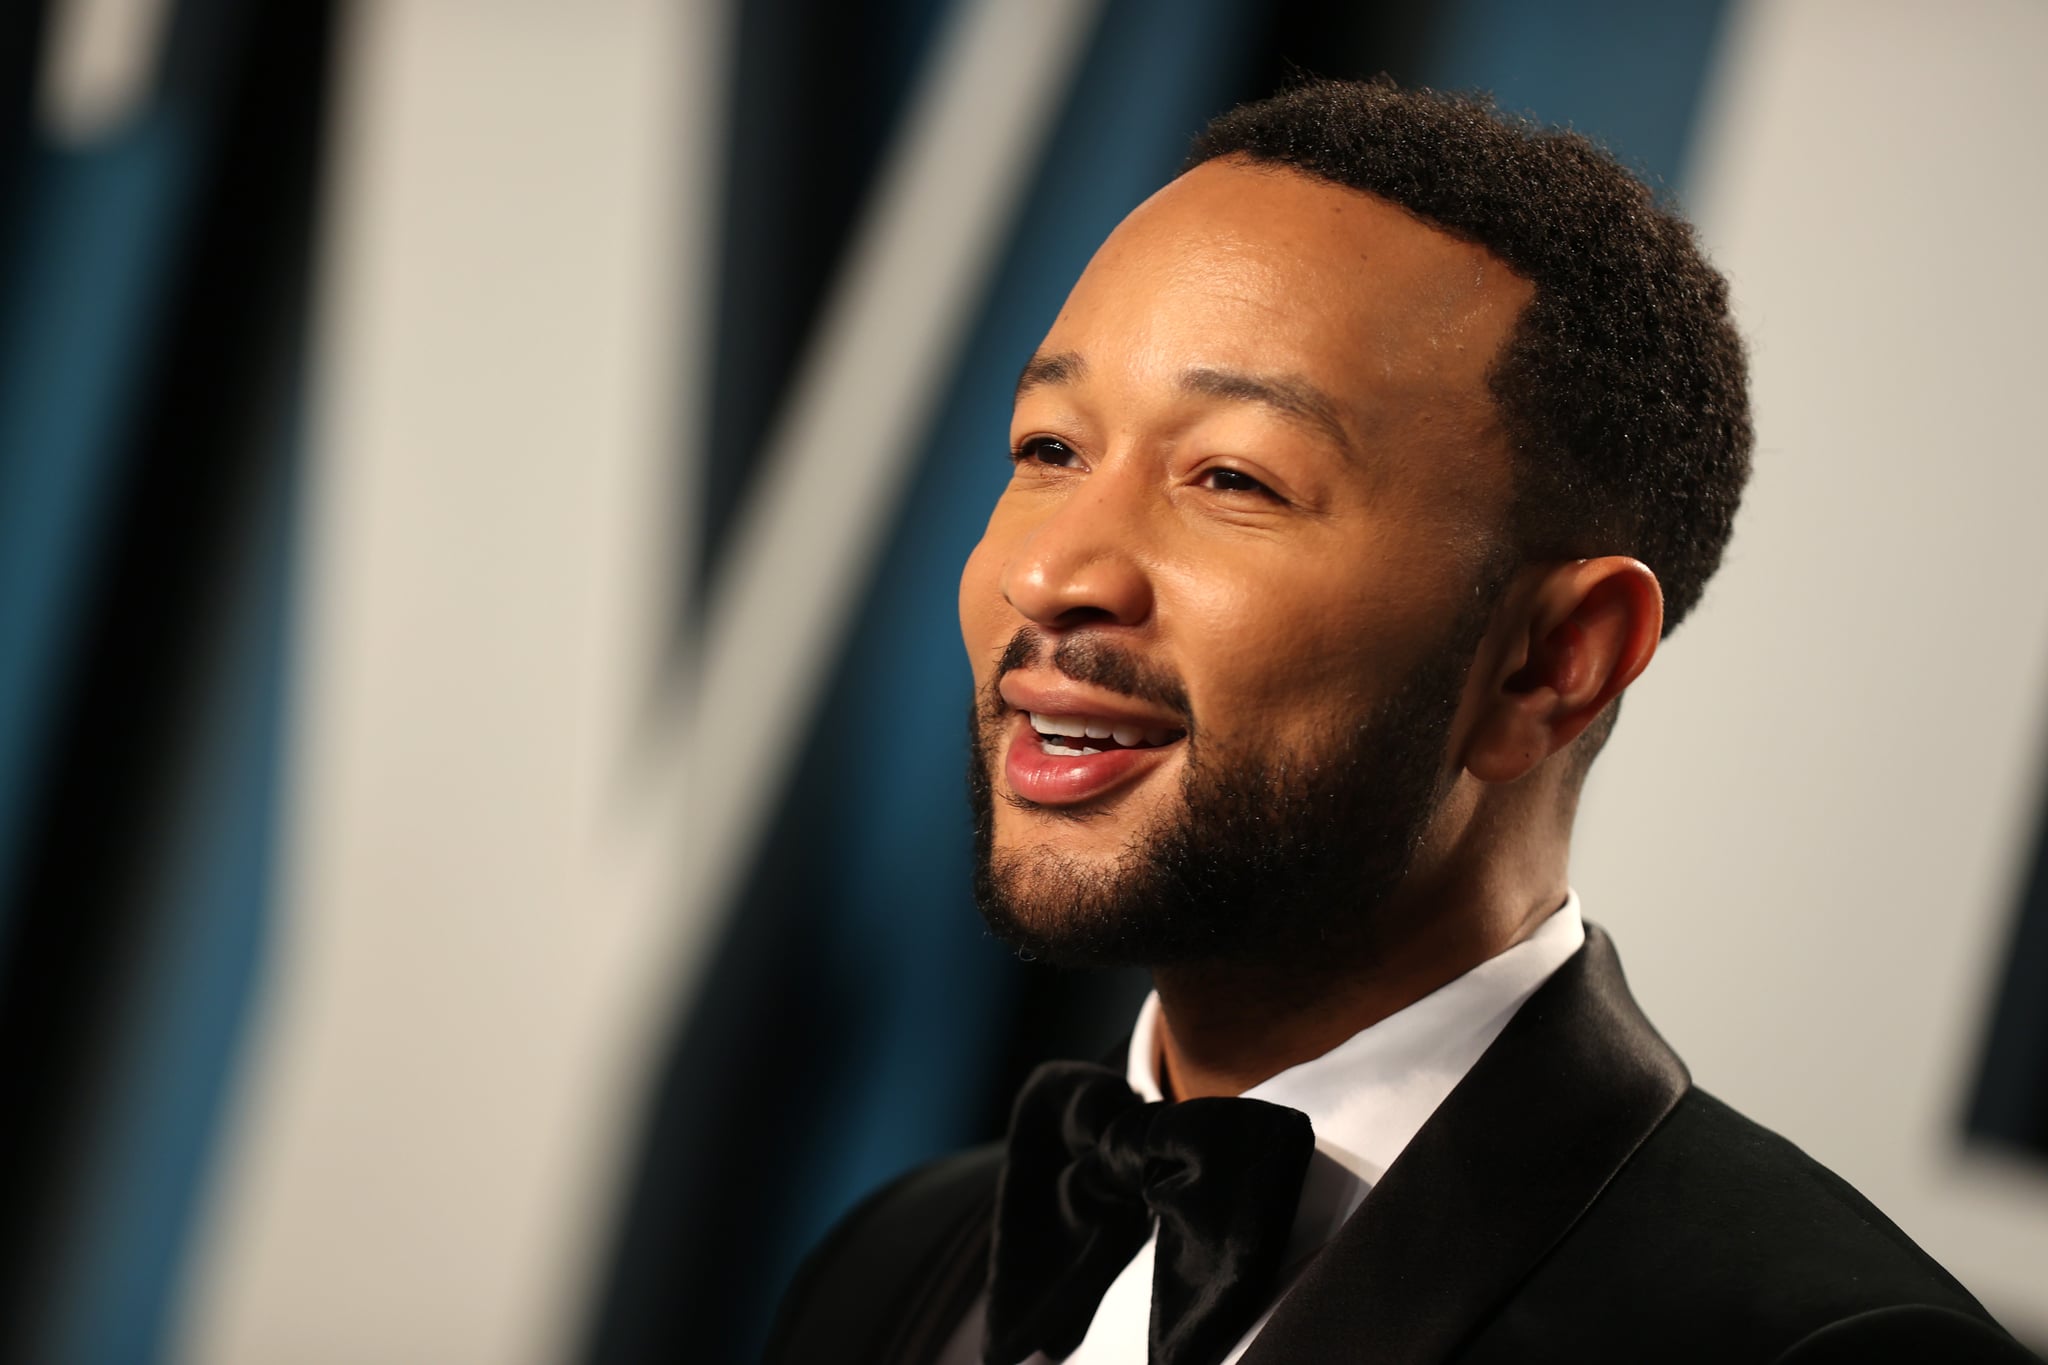 BEVERLY HILLS, CALIFORNIA - FEBRUARY 09: John Legend attends the 2020 Vanity Fair Oscar Party hosted by Radhika Jones at Wallis Annenberg Center for the Performing Arts on February 09, 2020 in Beverly Hills, California. (Photo by Rich Fury/VF20/Getty Images for Vanity Fair)